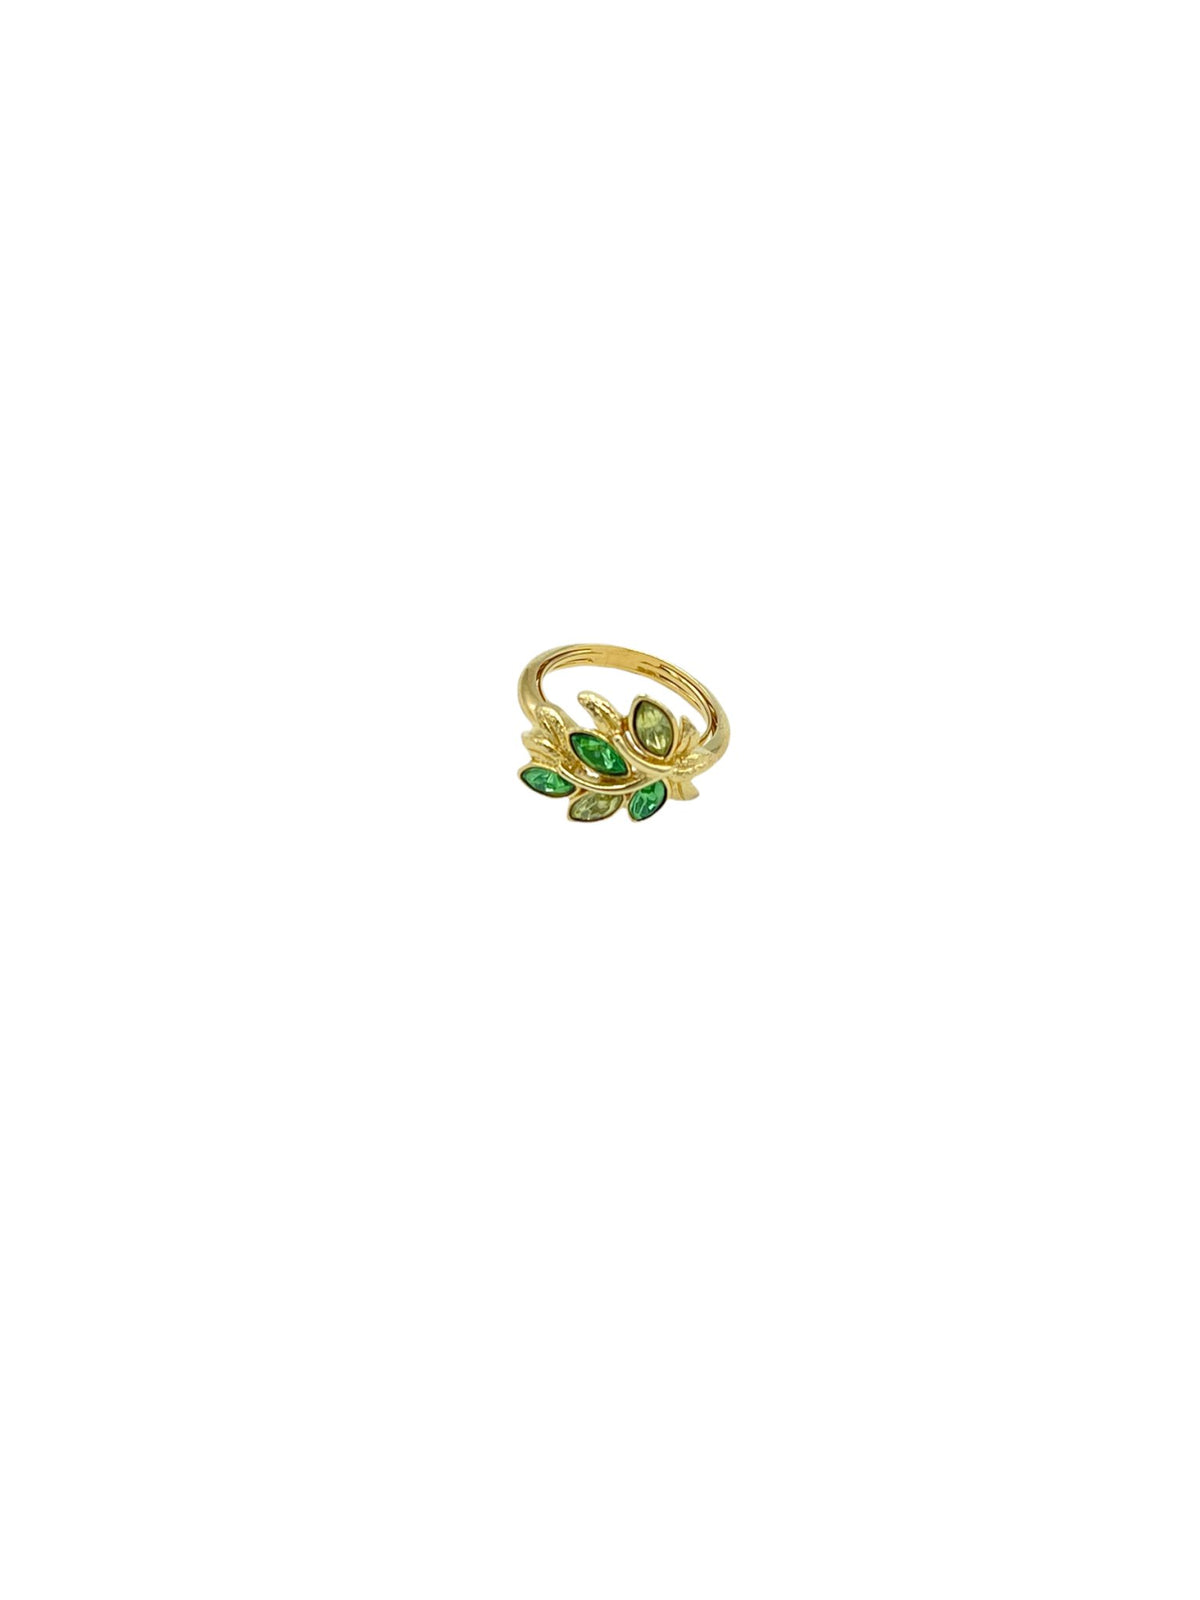 Avon Green Floral Vintage Adjustable Cocktail Ring - 24 Wishes Vintage Jewelry